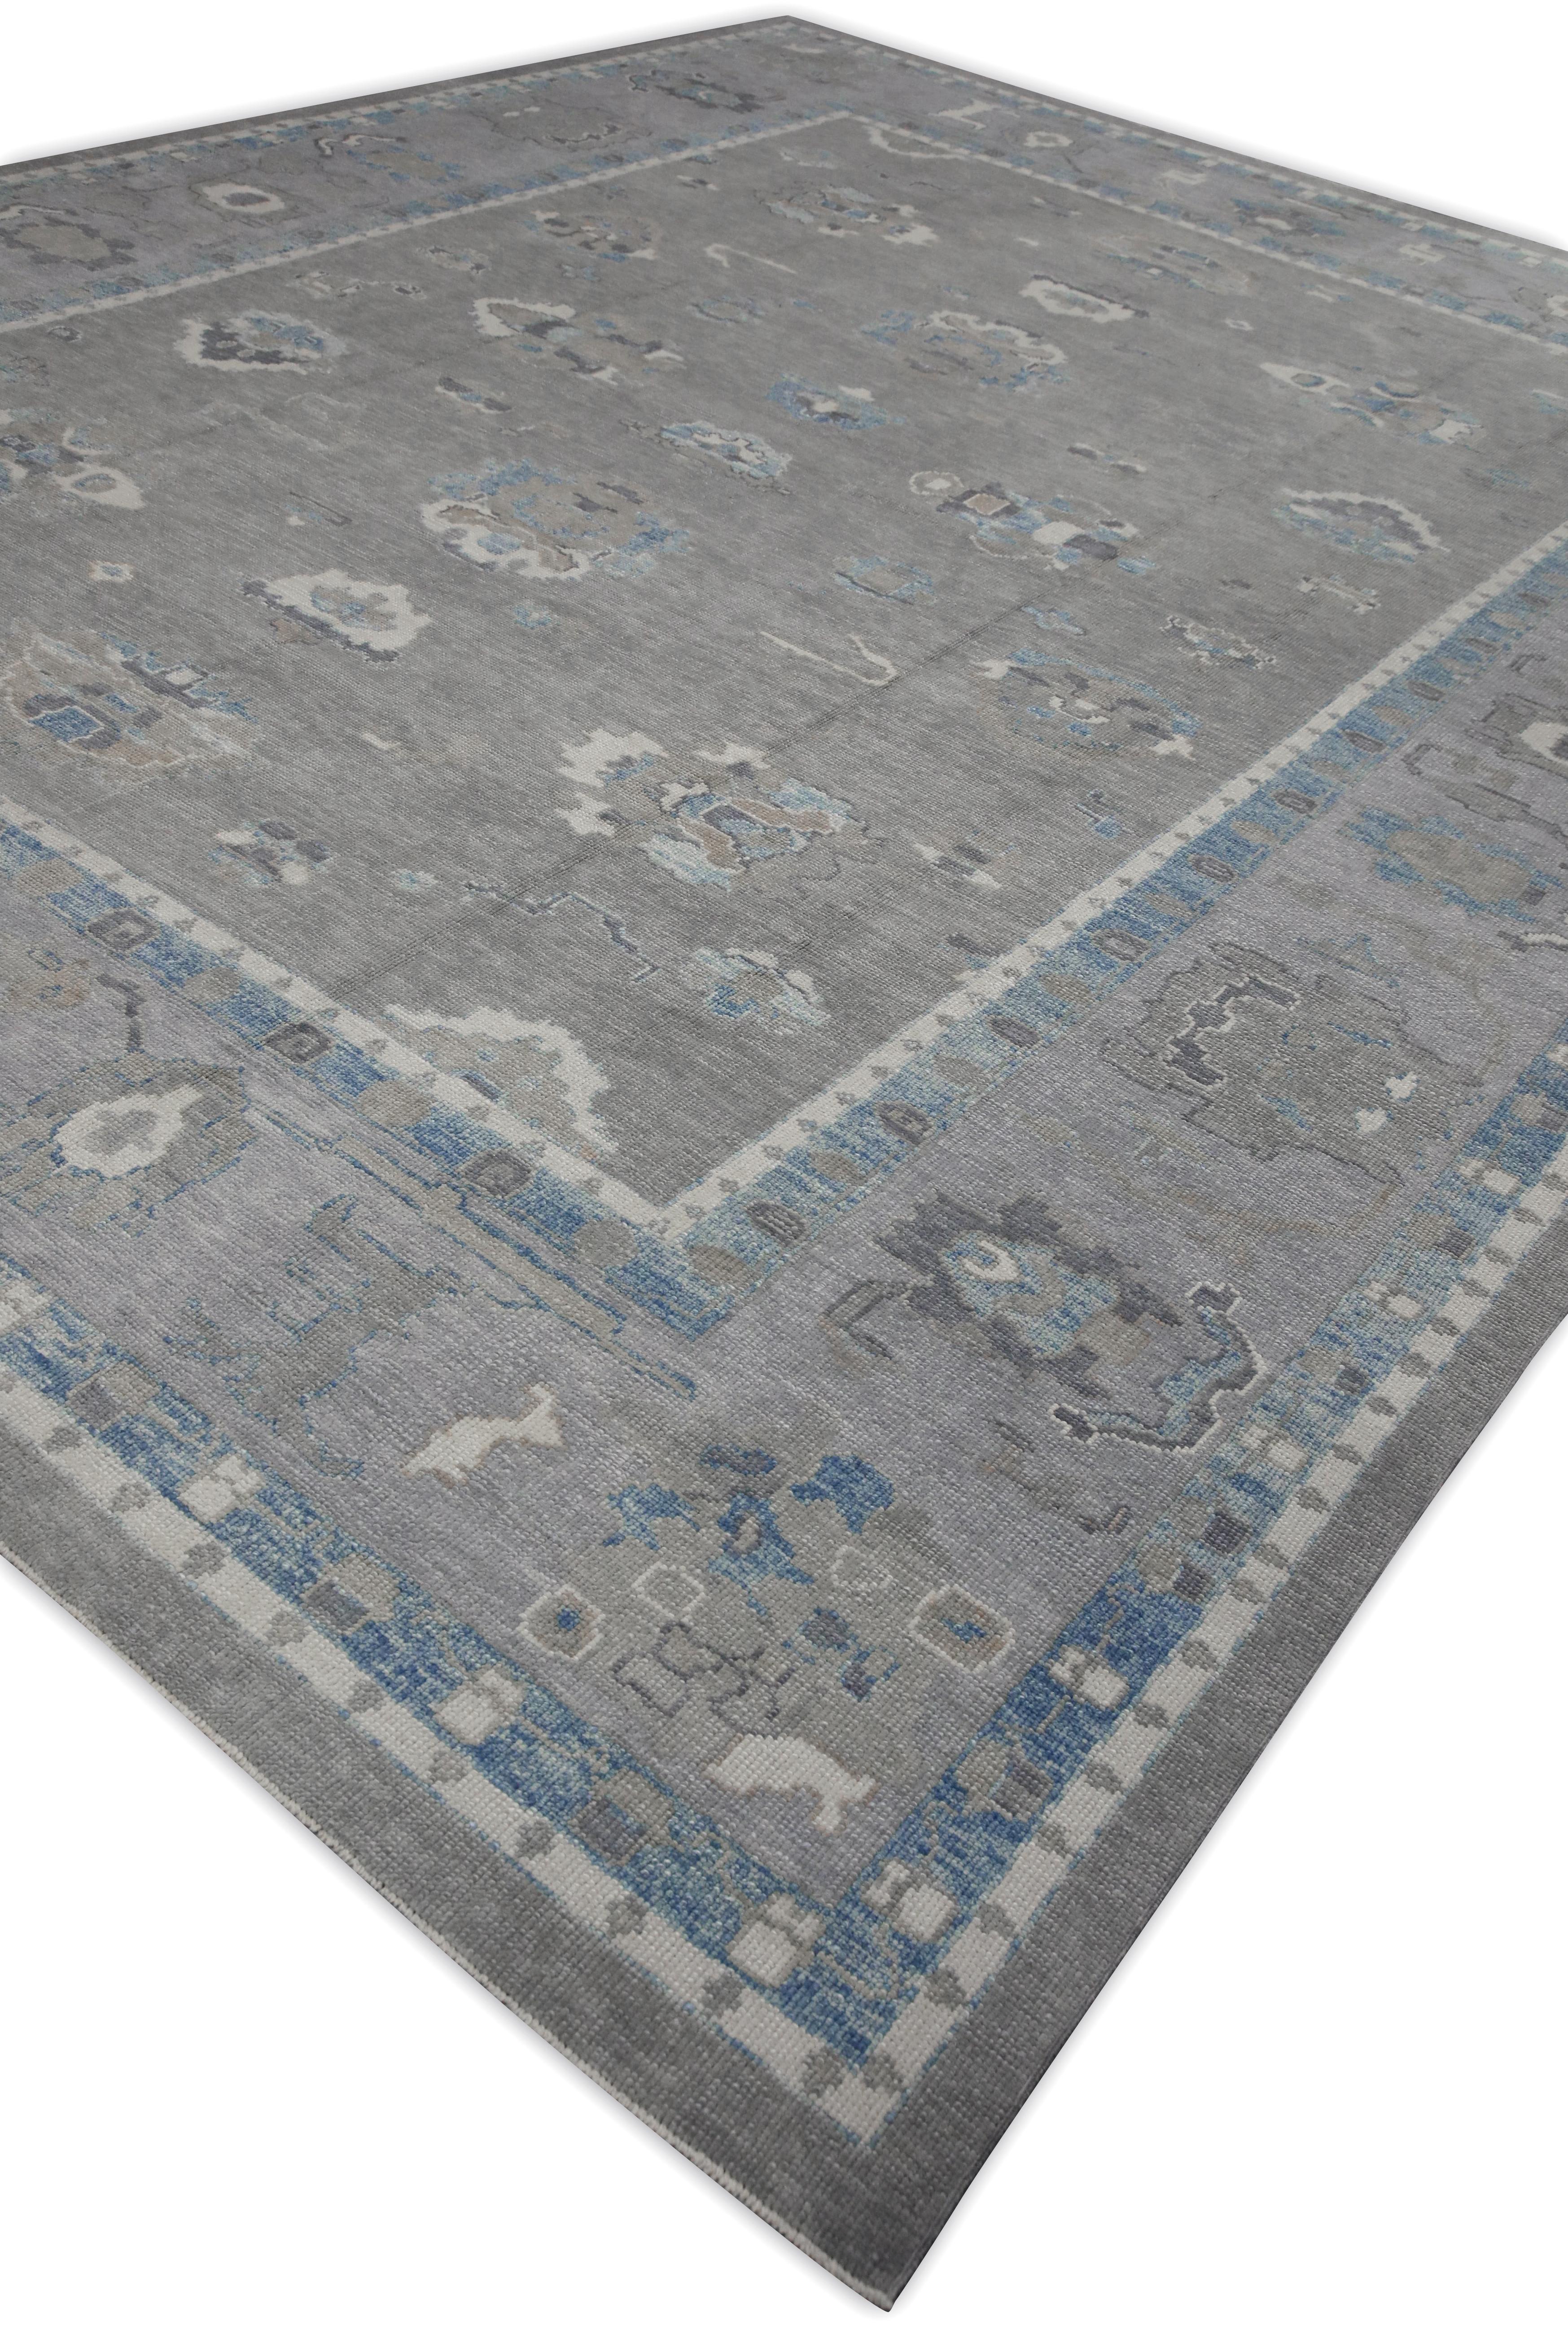 Contemporary Gray & Blue Floral Design Handwoven Wool Turkish Oushak Rug 11'6